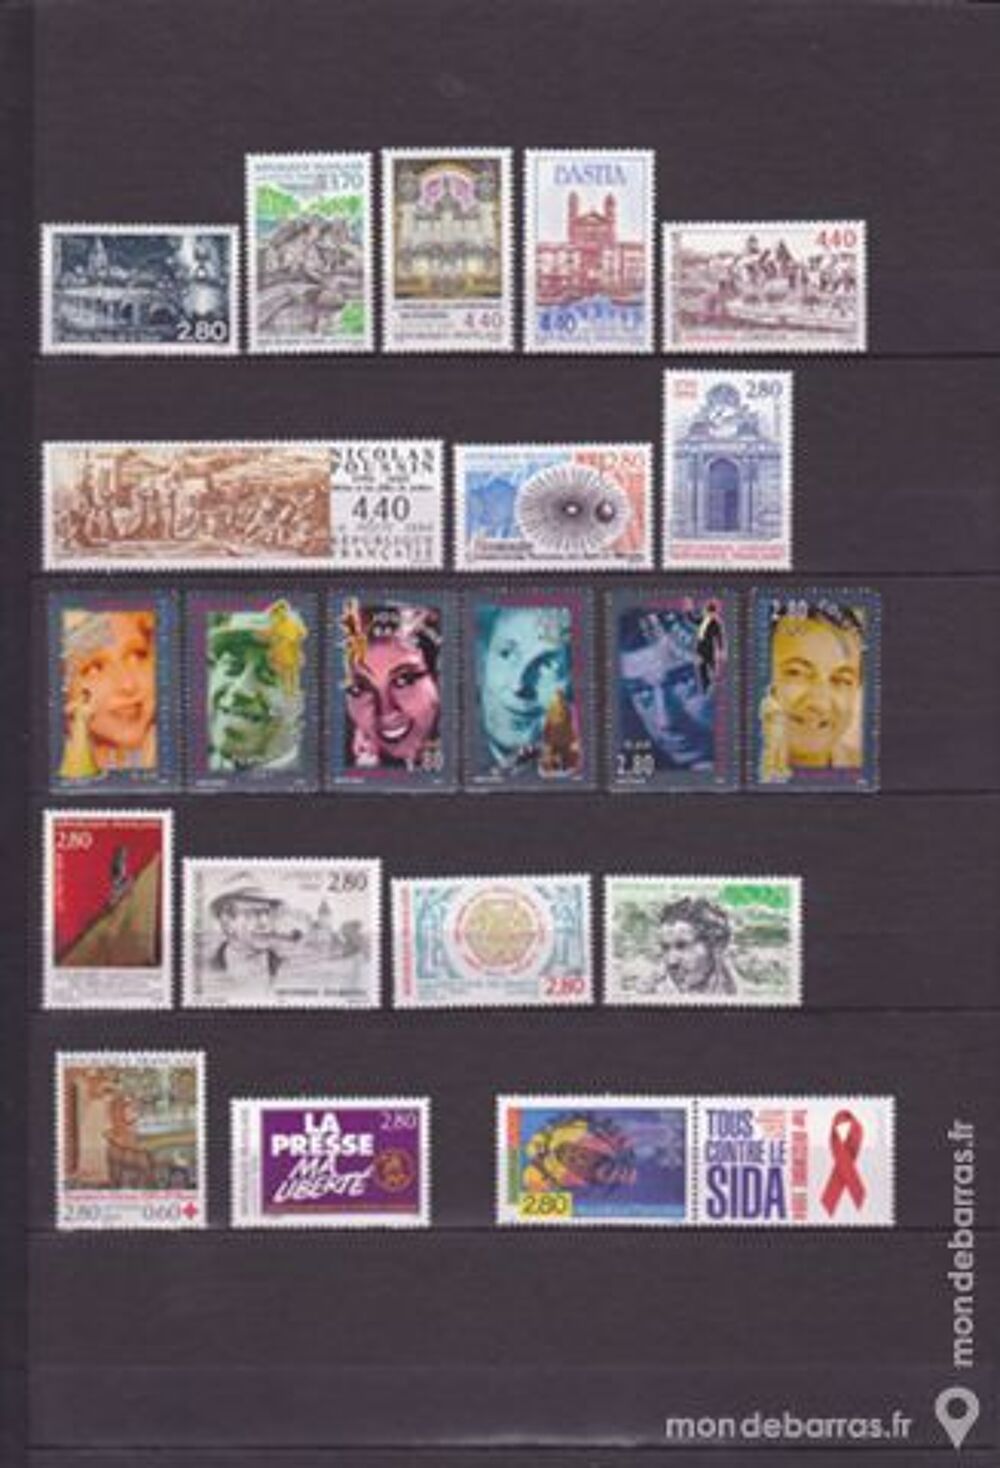 France timbres poste neufs 1994 , 04 carnets 